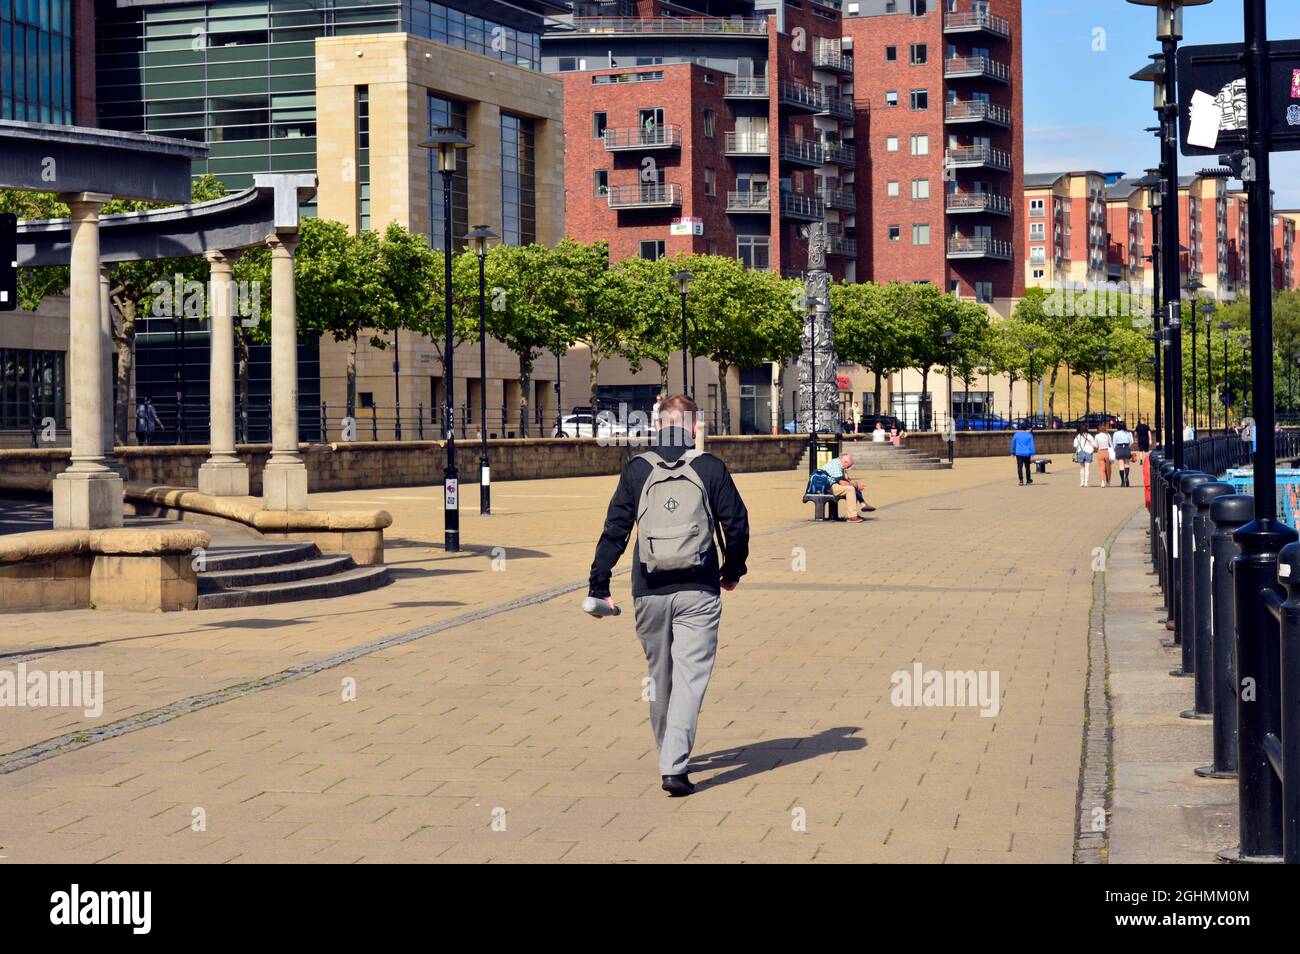 NEWCASTLE. TYNE and WEAR. ENGLAND. 06-24-21. The Quayside by the Tyne, a regenerated open space overlooked by office and apartment blocks. Stock Photo